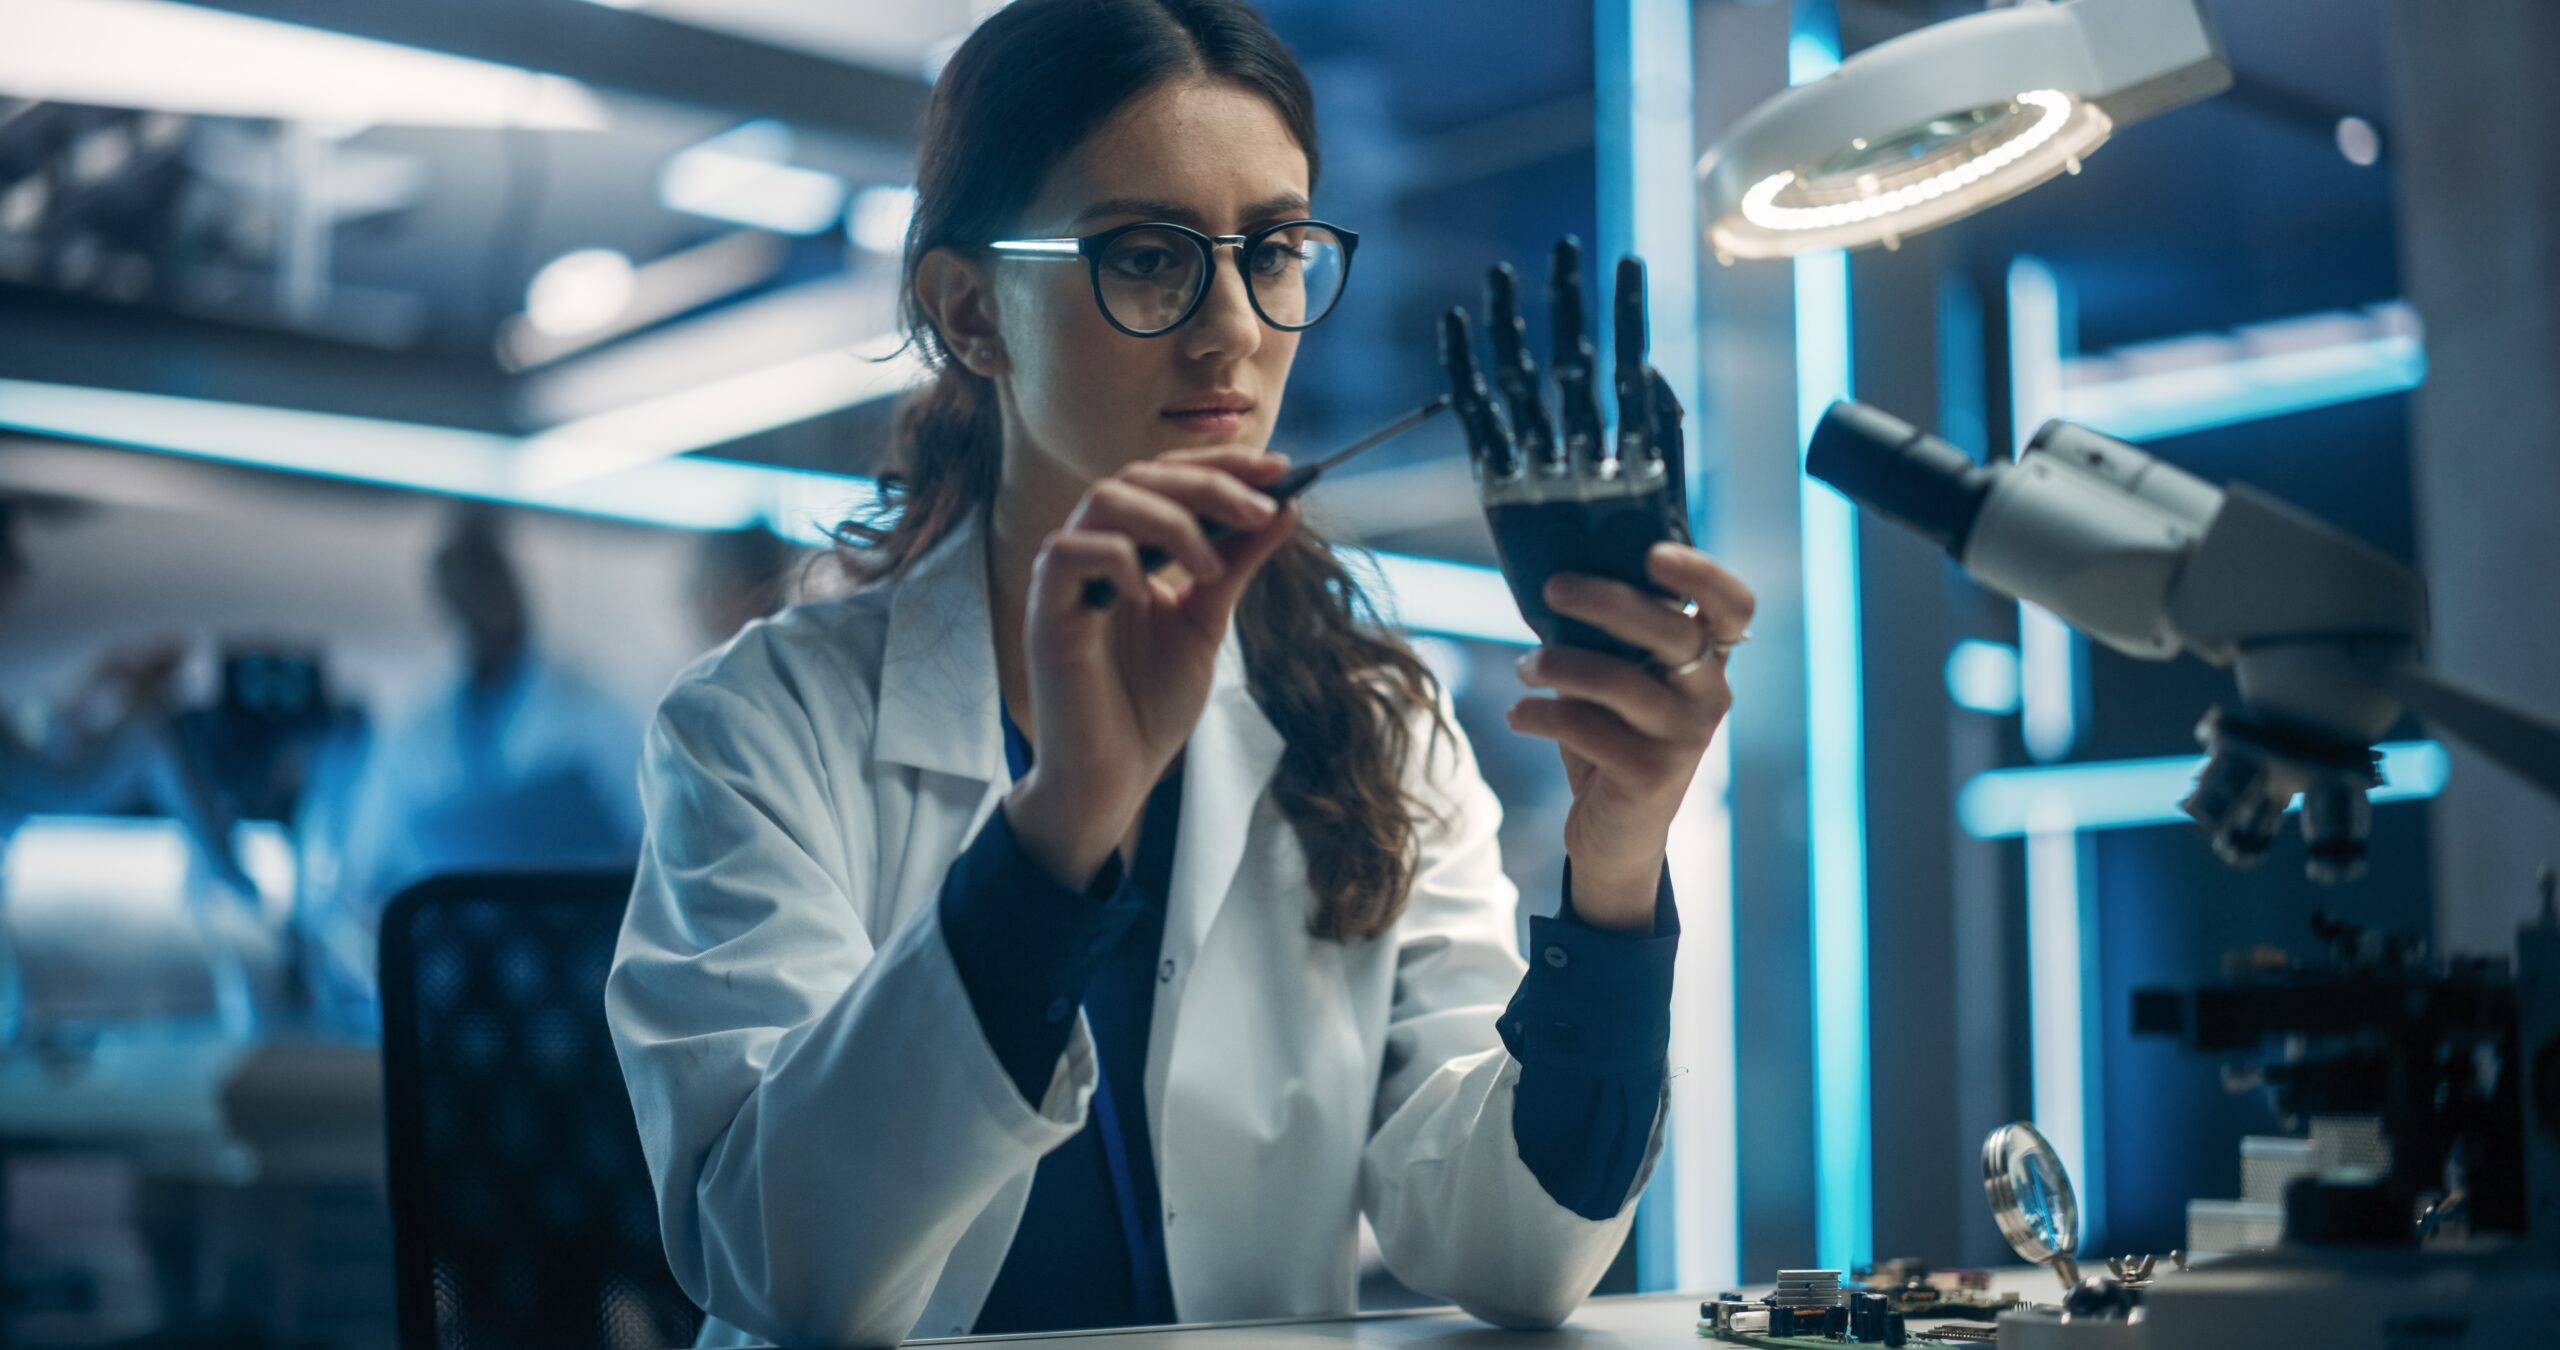 Stock image of a young scientist working in technological research and development company, assembling an  innovative bionic prosthetic hand for the physically impaired.